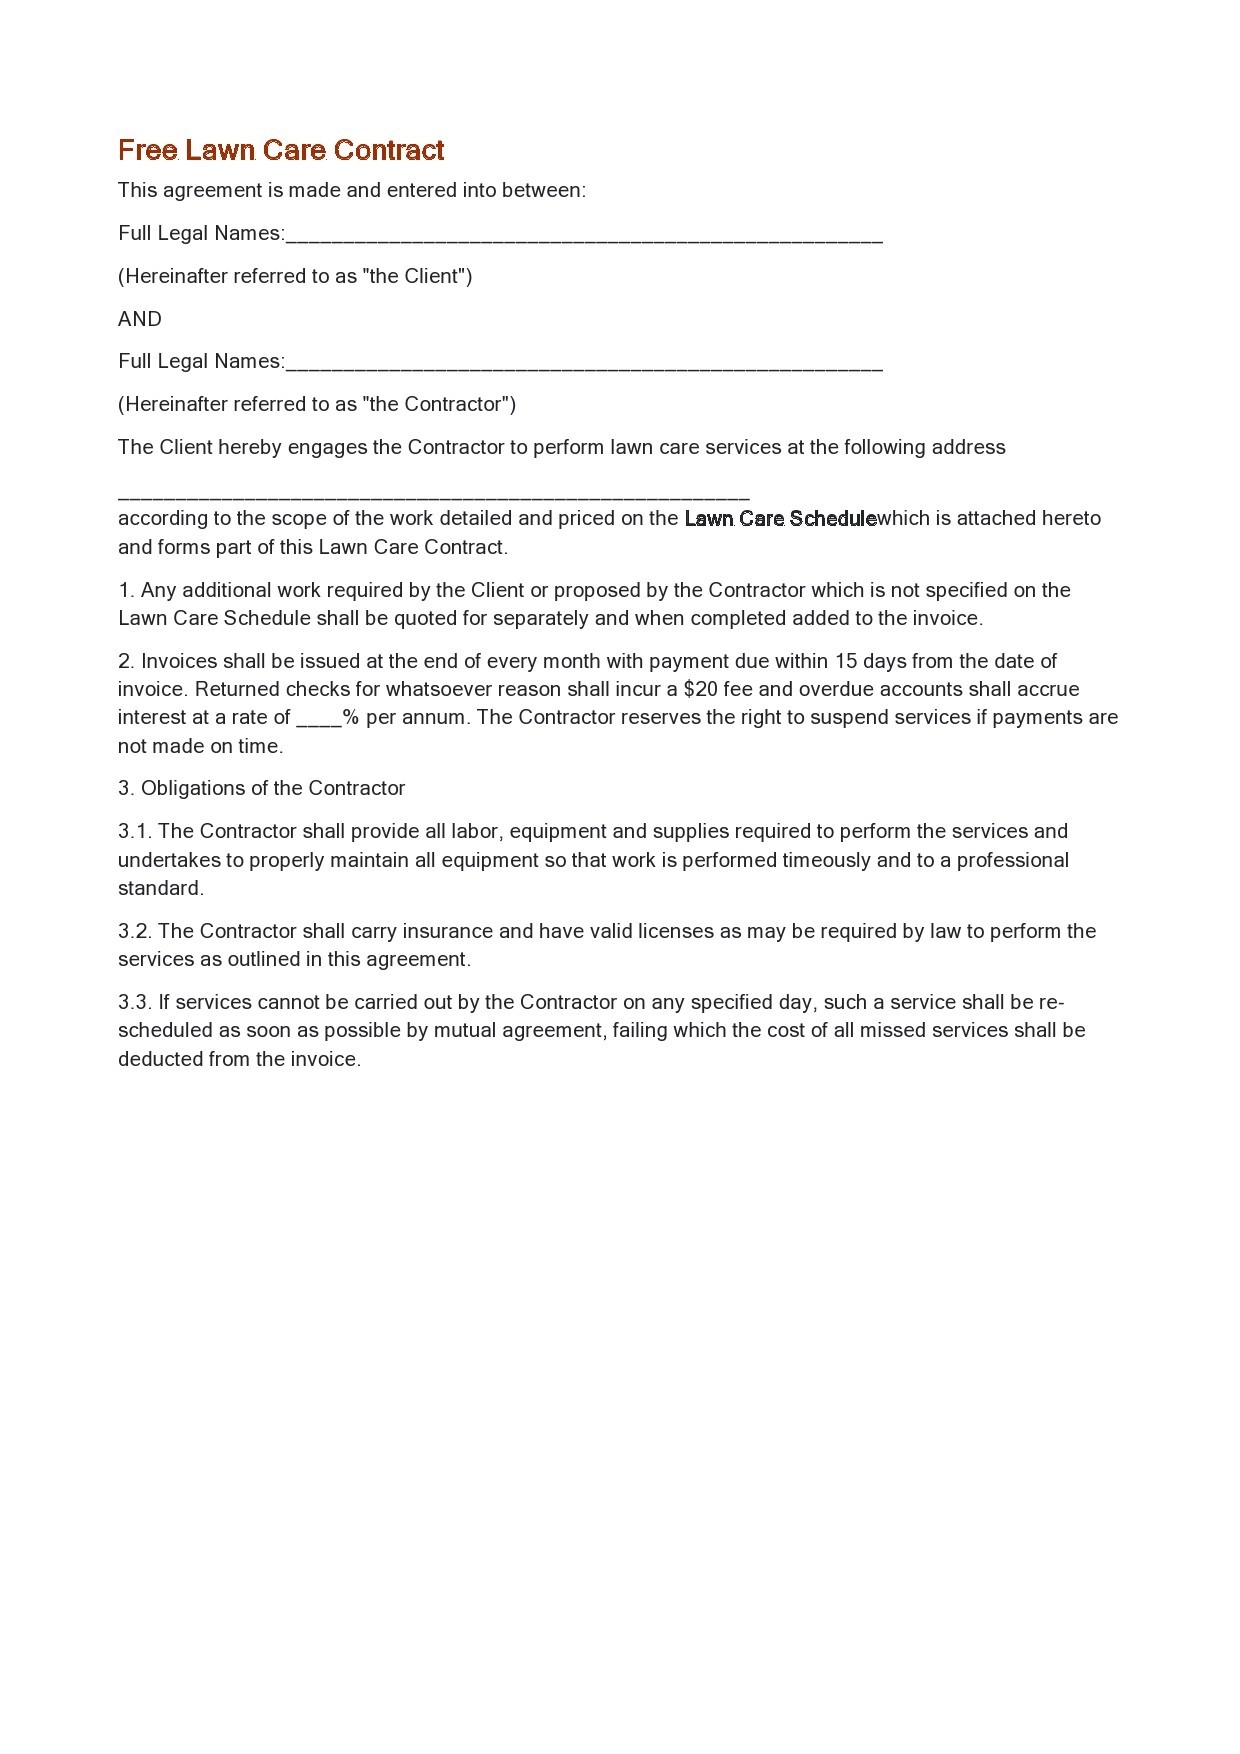 Free lawn care contract template 04